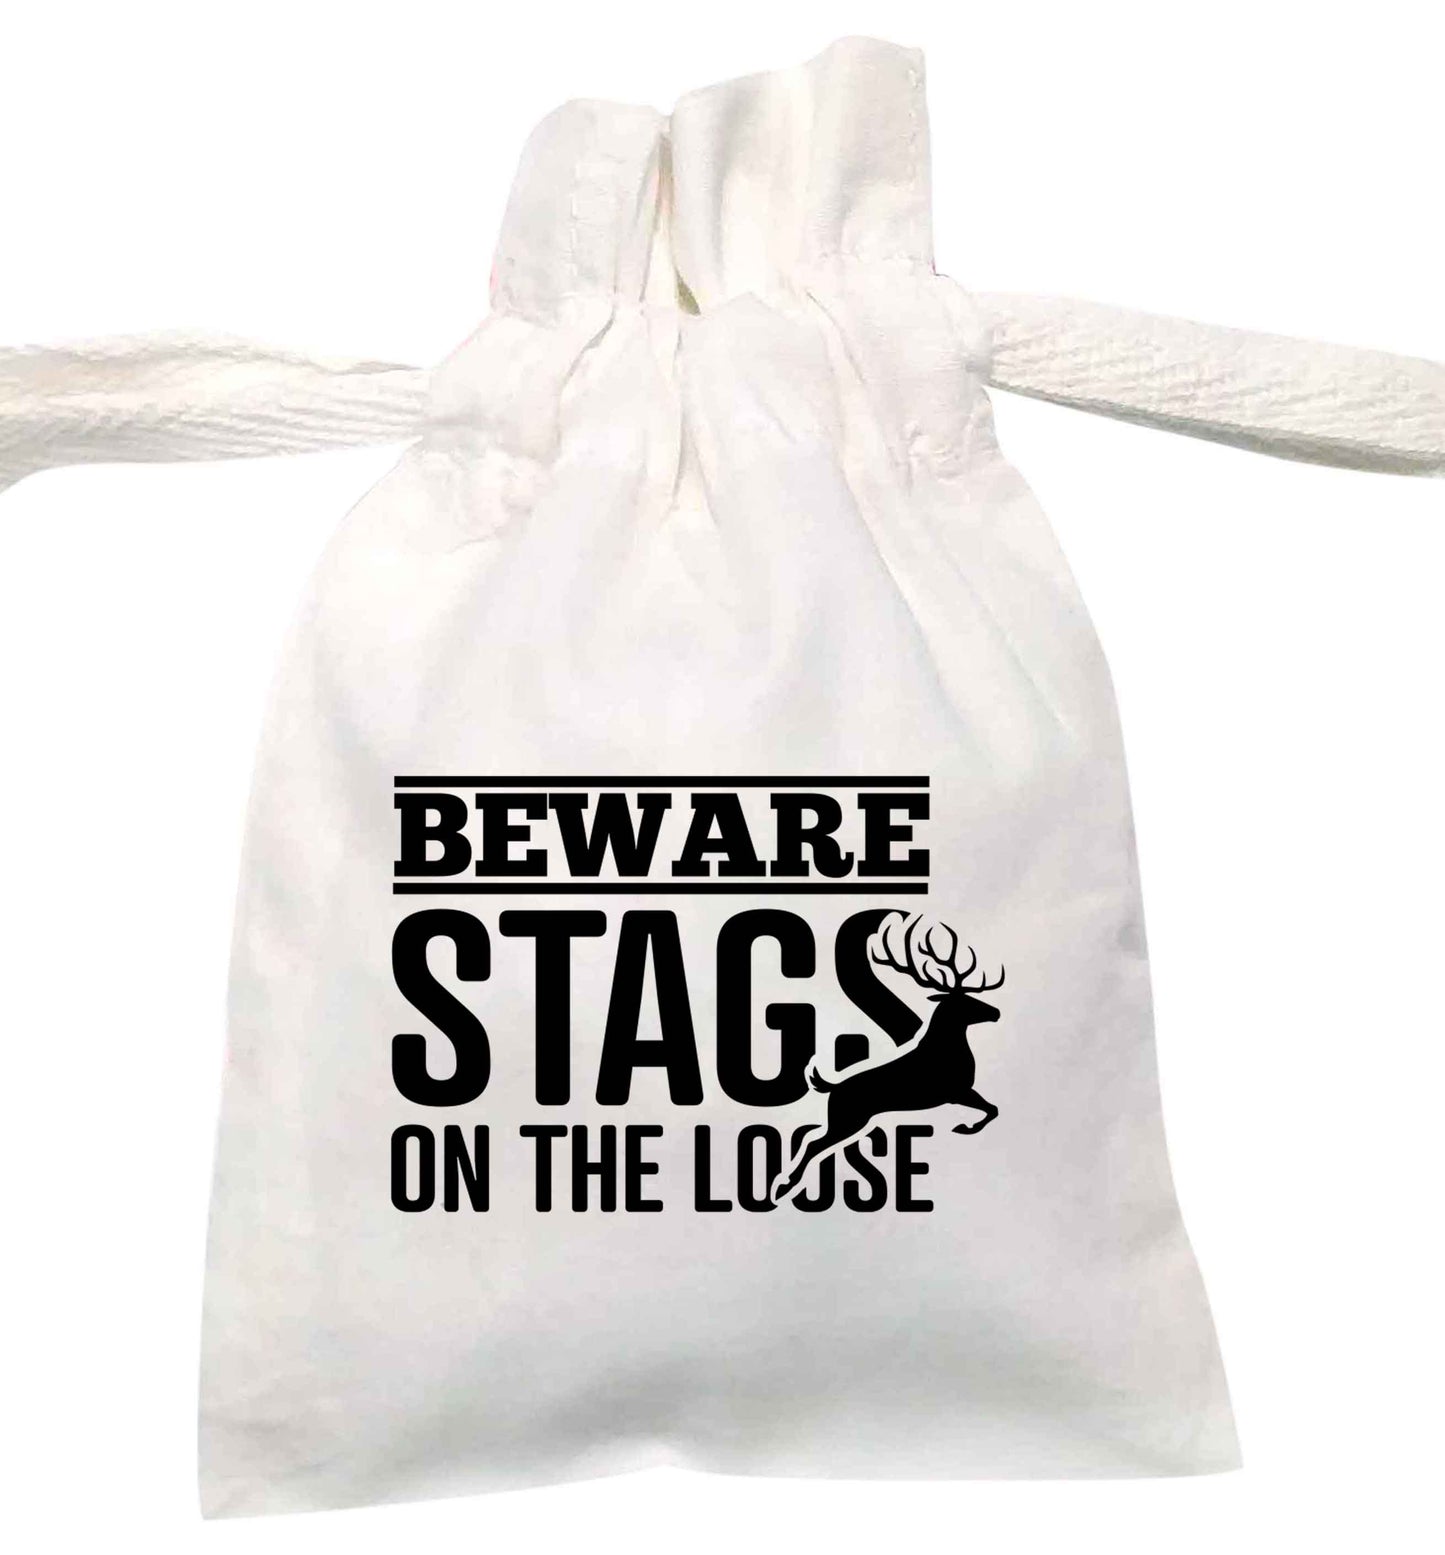 Beware stags on the loose | XS - L | Pouch / Drawstring bag / Sack | Organic Cotton | Bulk discounts available!